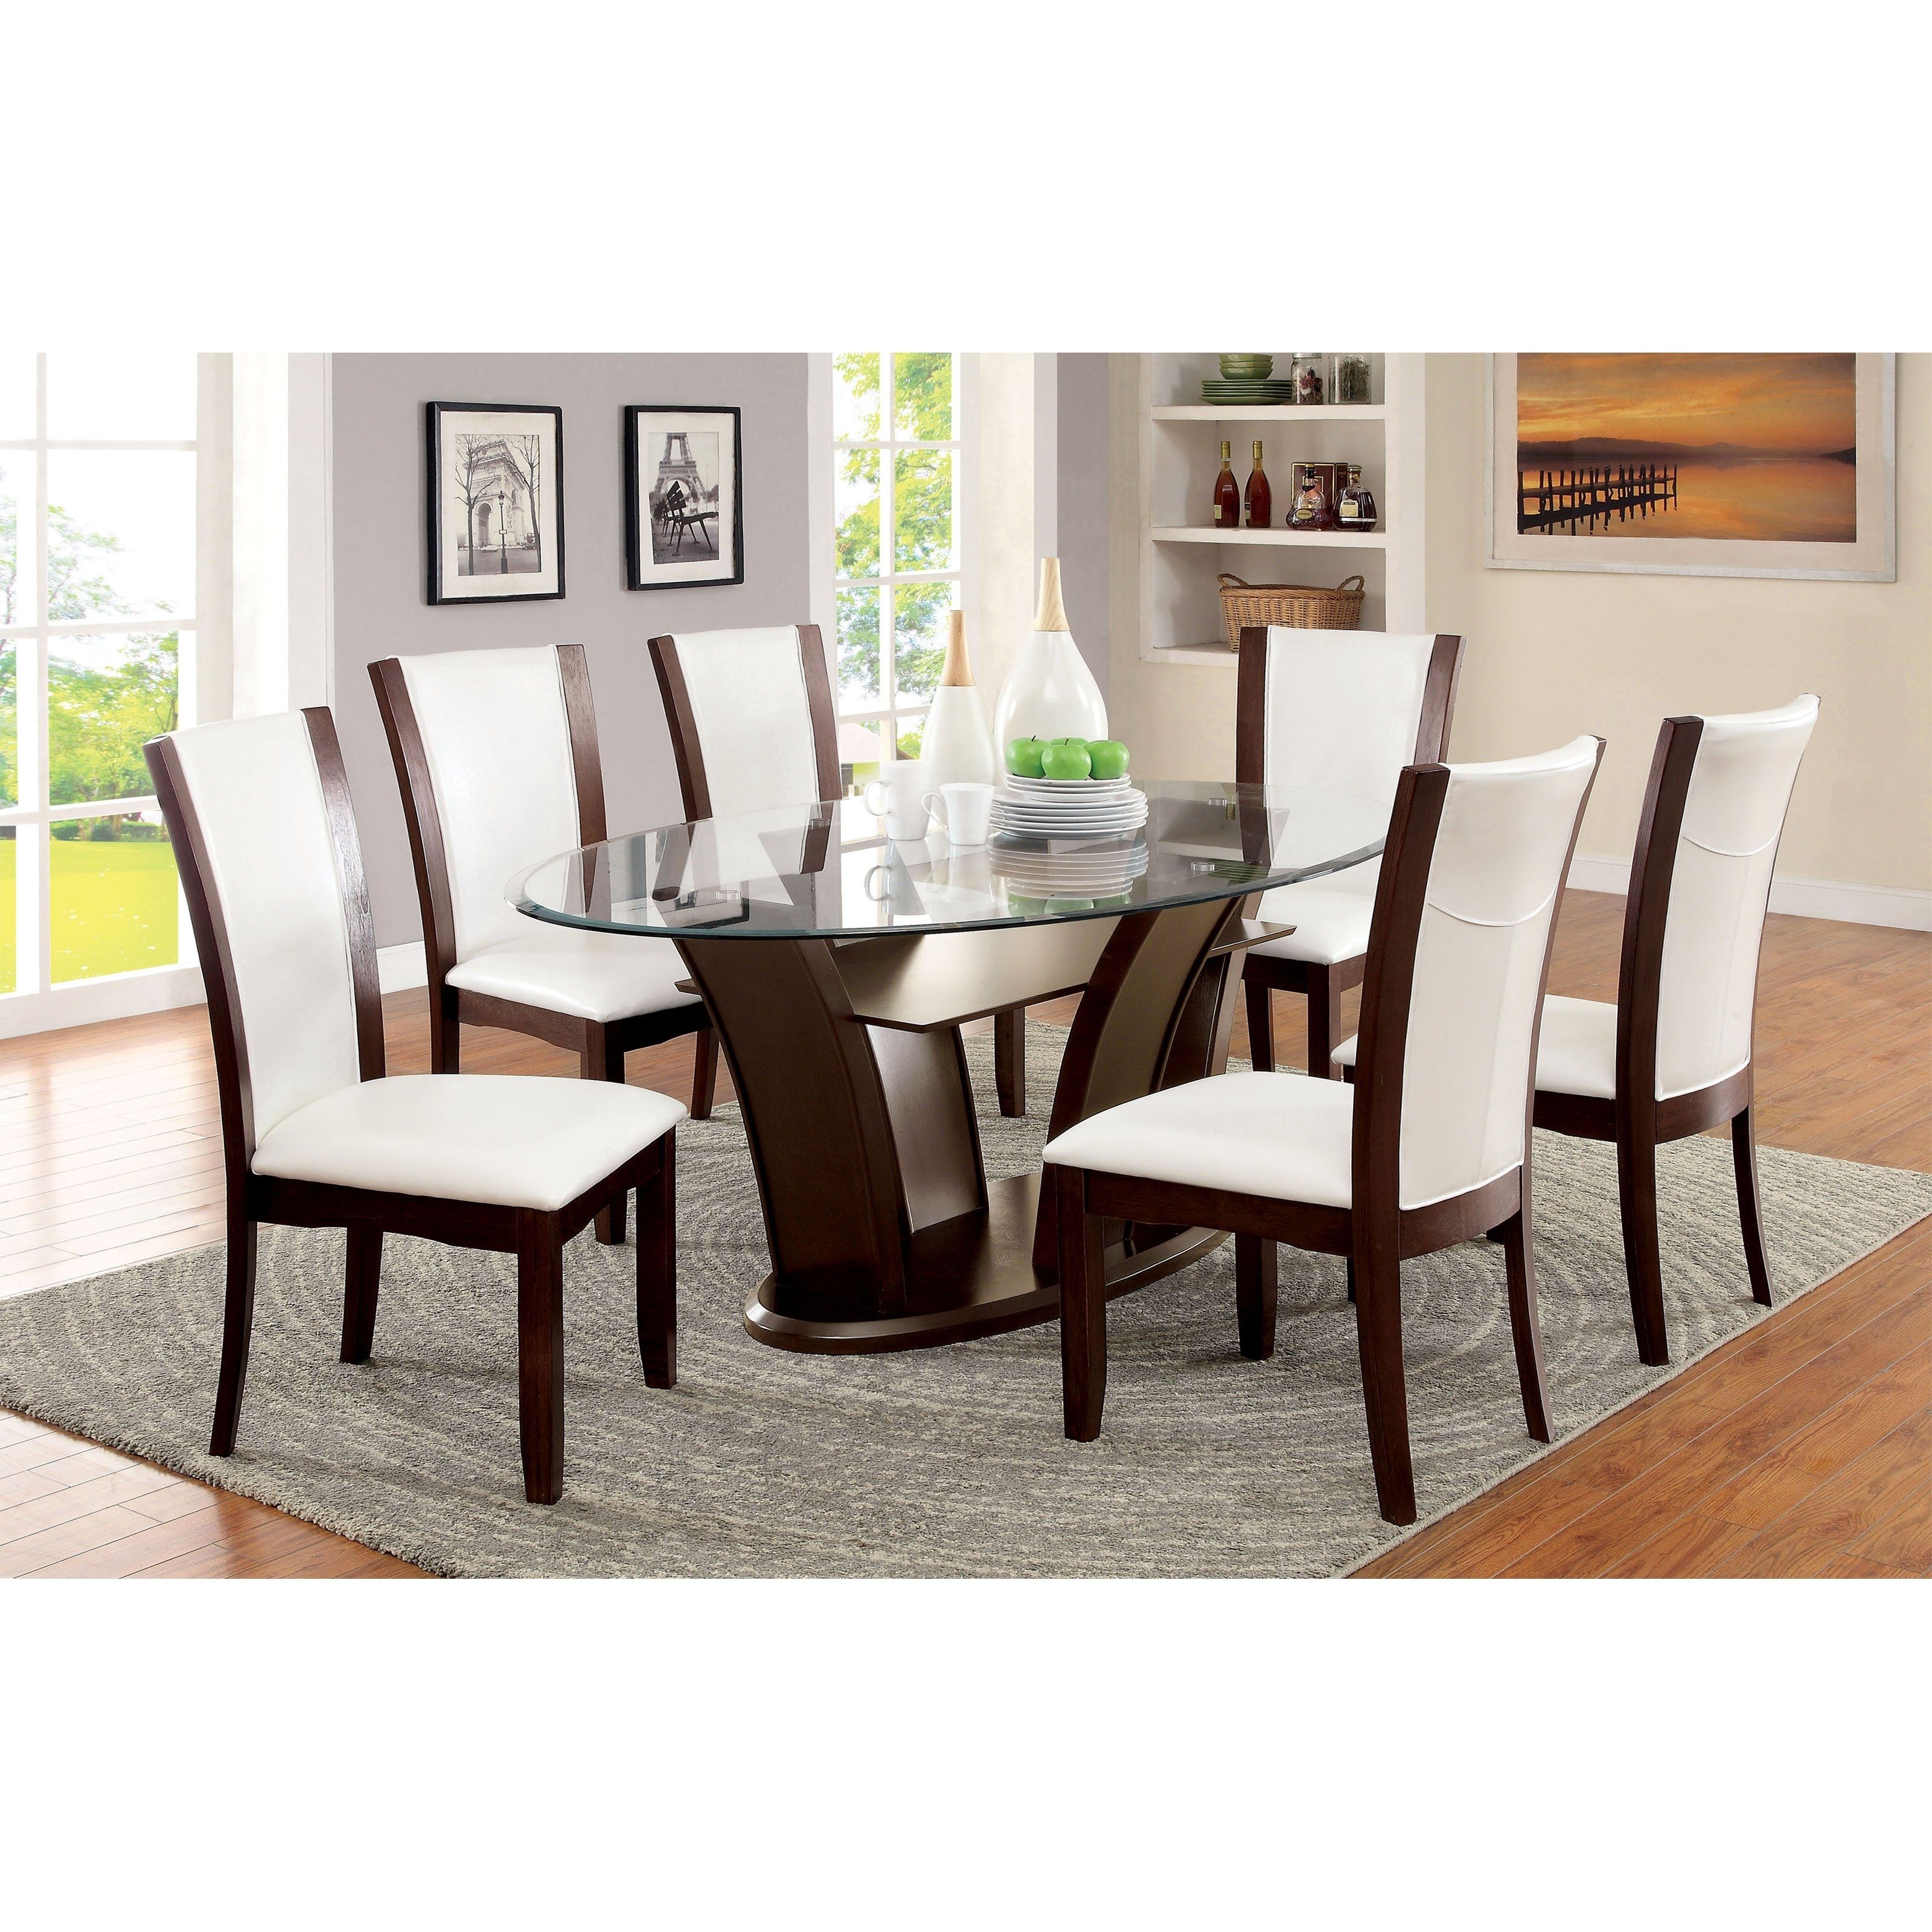 Furniture Of America Lavelle 7 Piece Tempered Glass Top Dining Table Within Most Popular Glass Dining Tables With 6 Chairs (View 25 of 25)